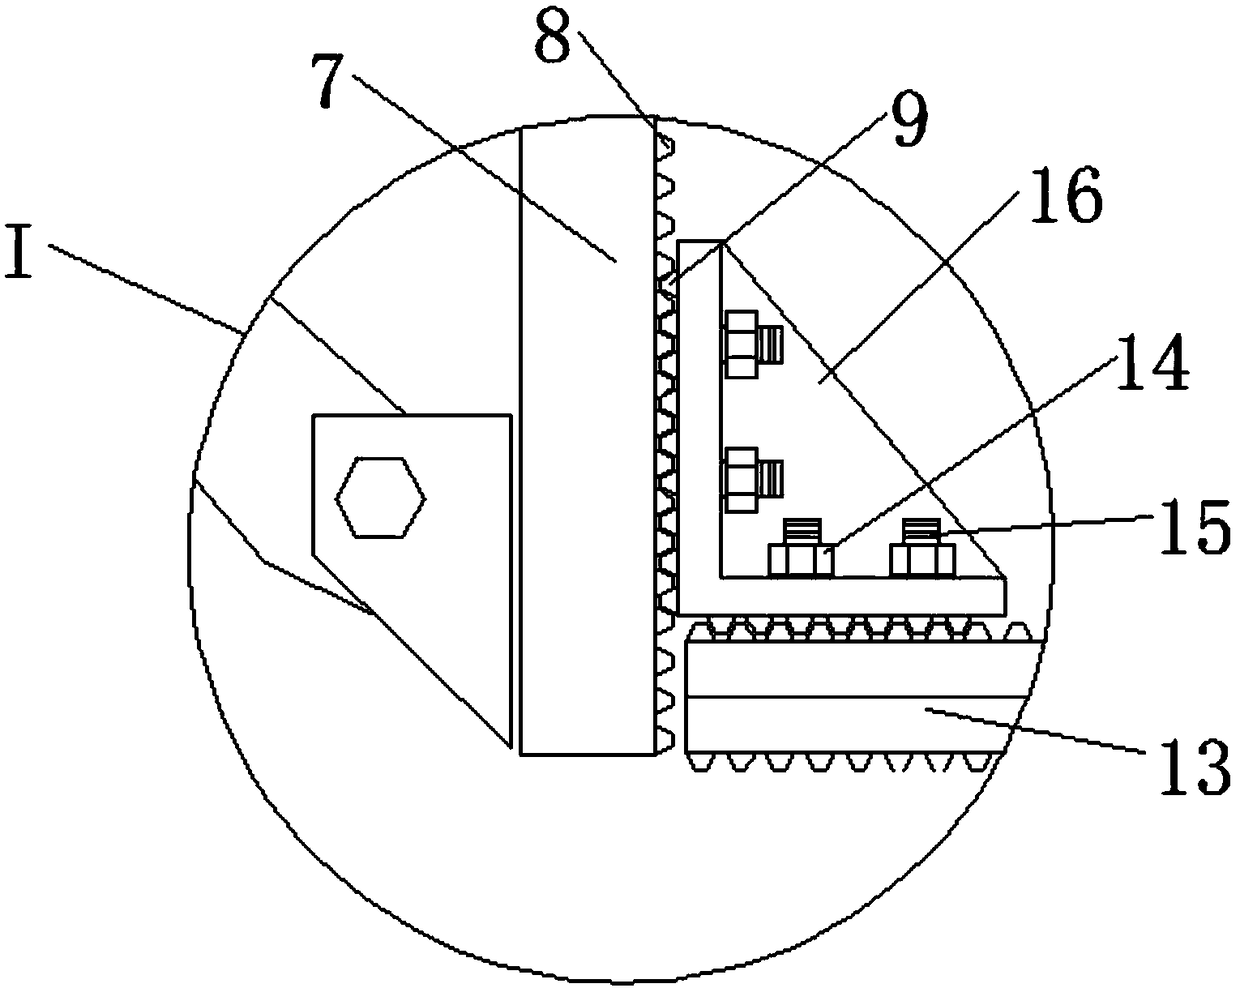 Anti-loose anti-seismic supporting hanging bracket for installing pipeline